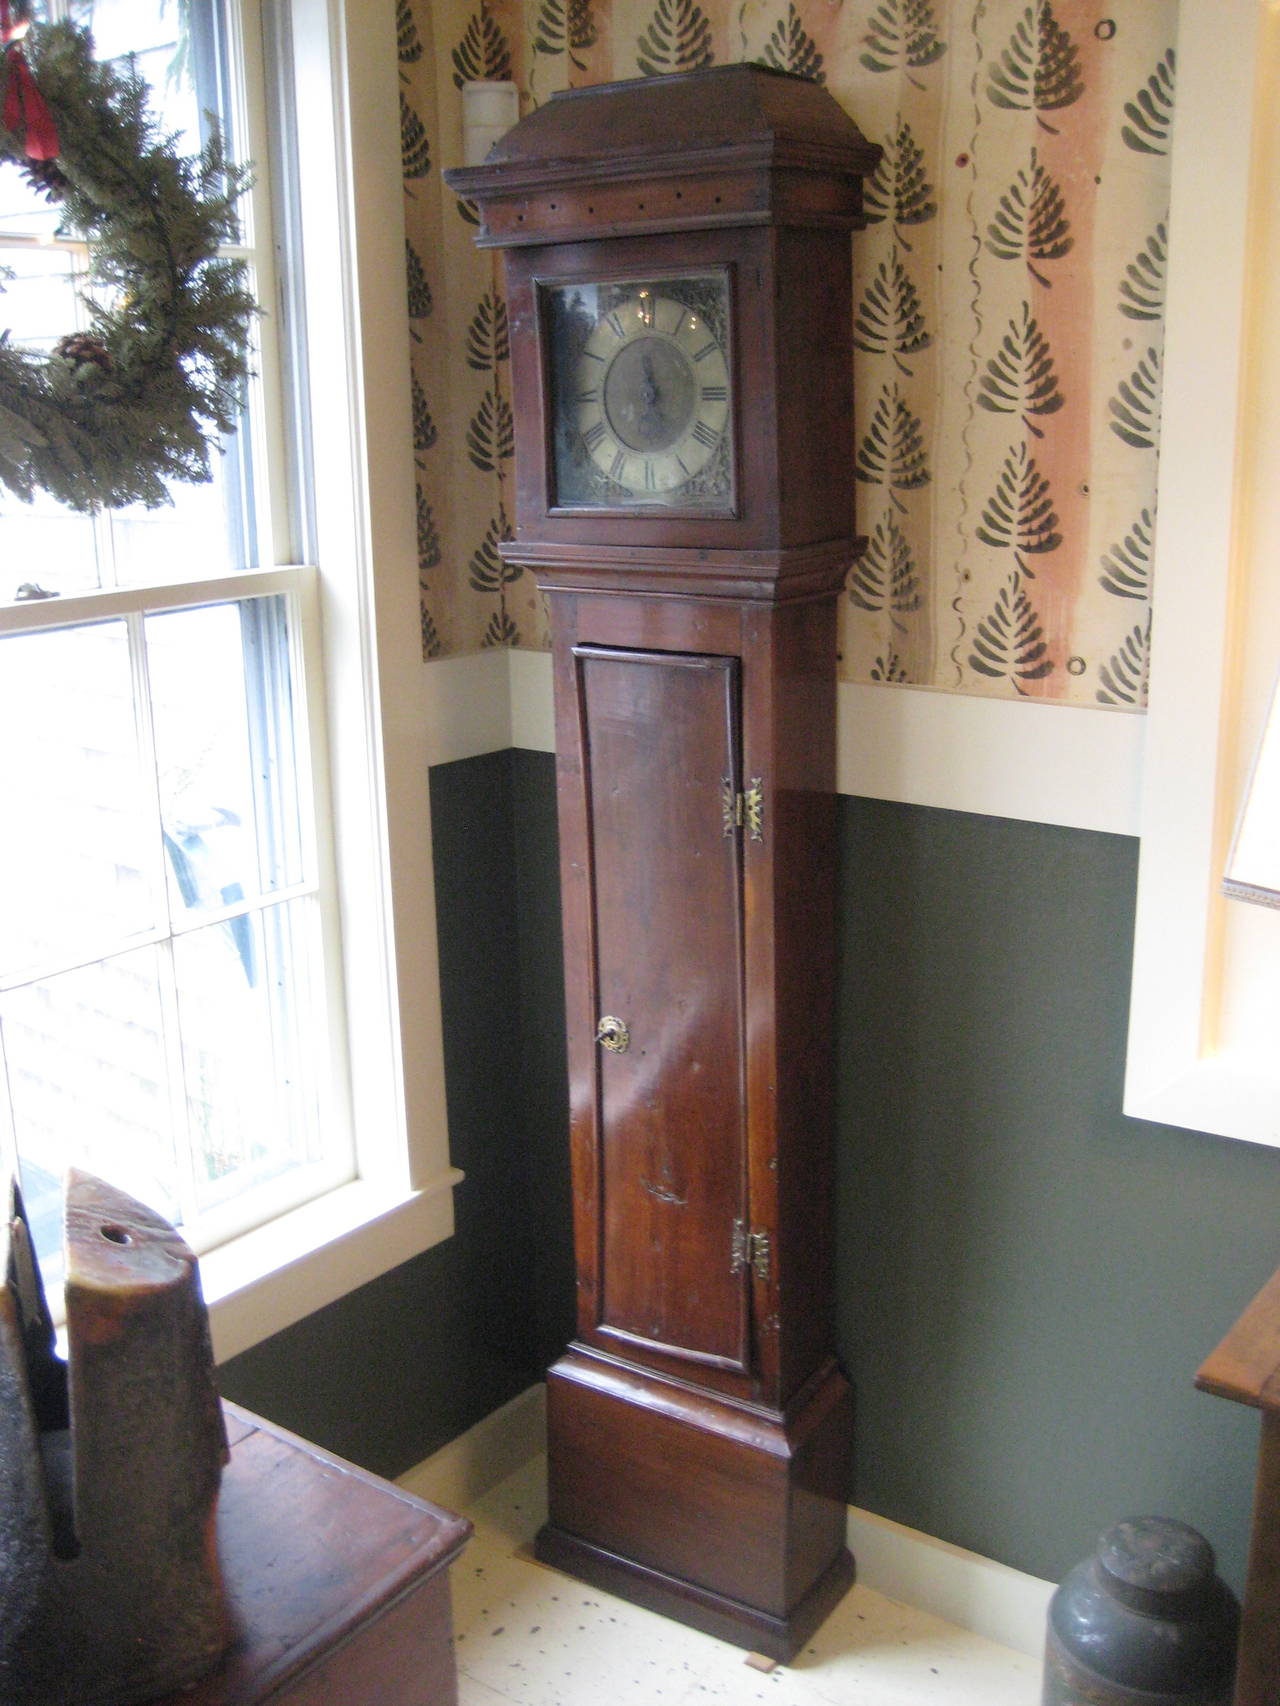 English yew wood tall case clock with narrow proportions.